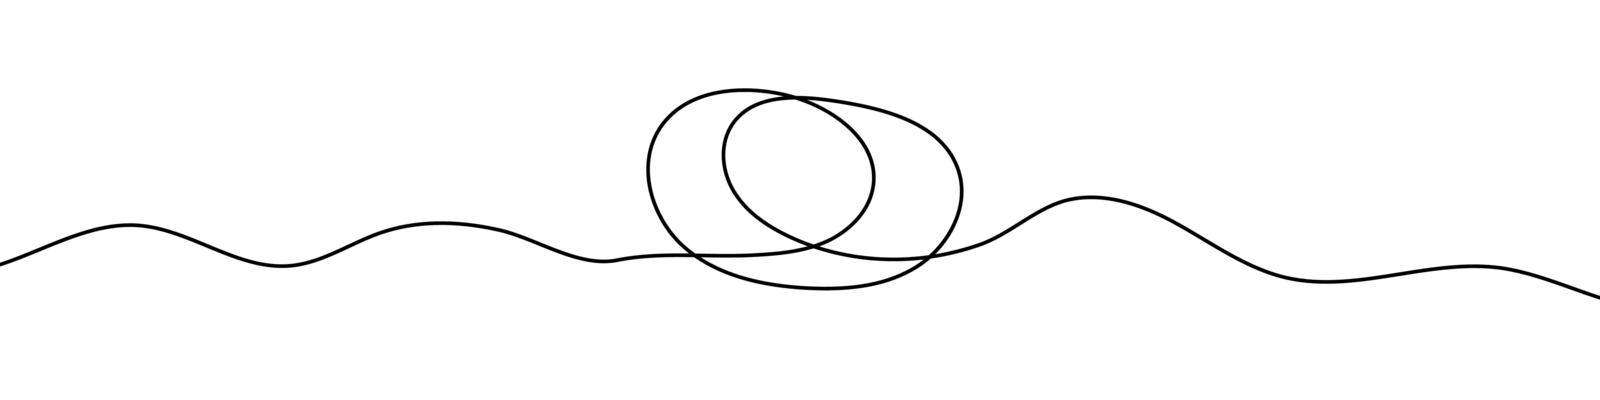 ПечатьContinuous line drawing of round frame. One line icon of frame. One line drawing background. by Chekman